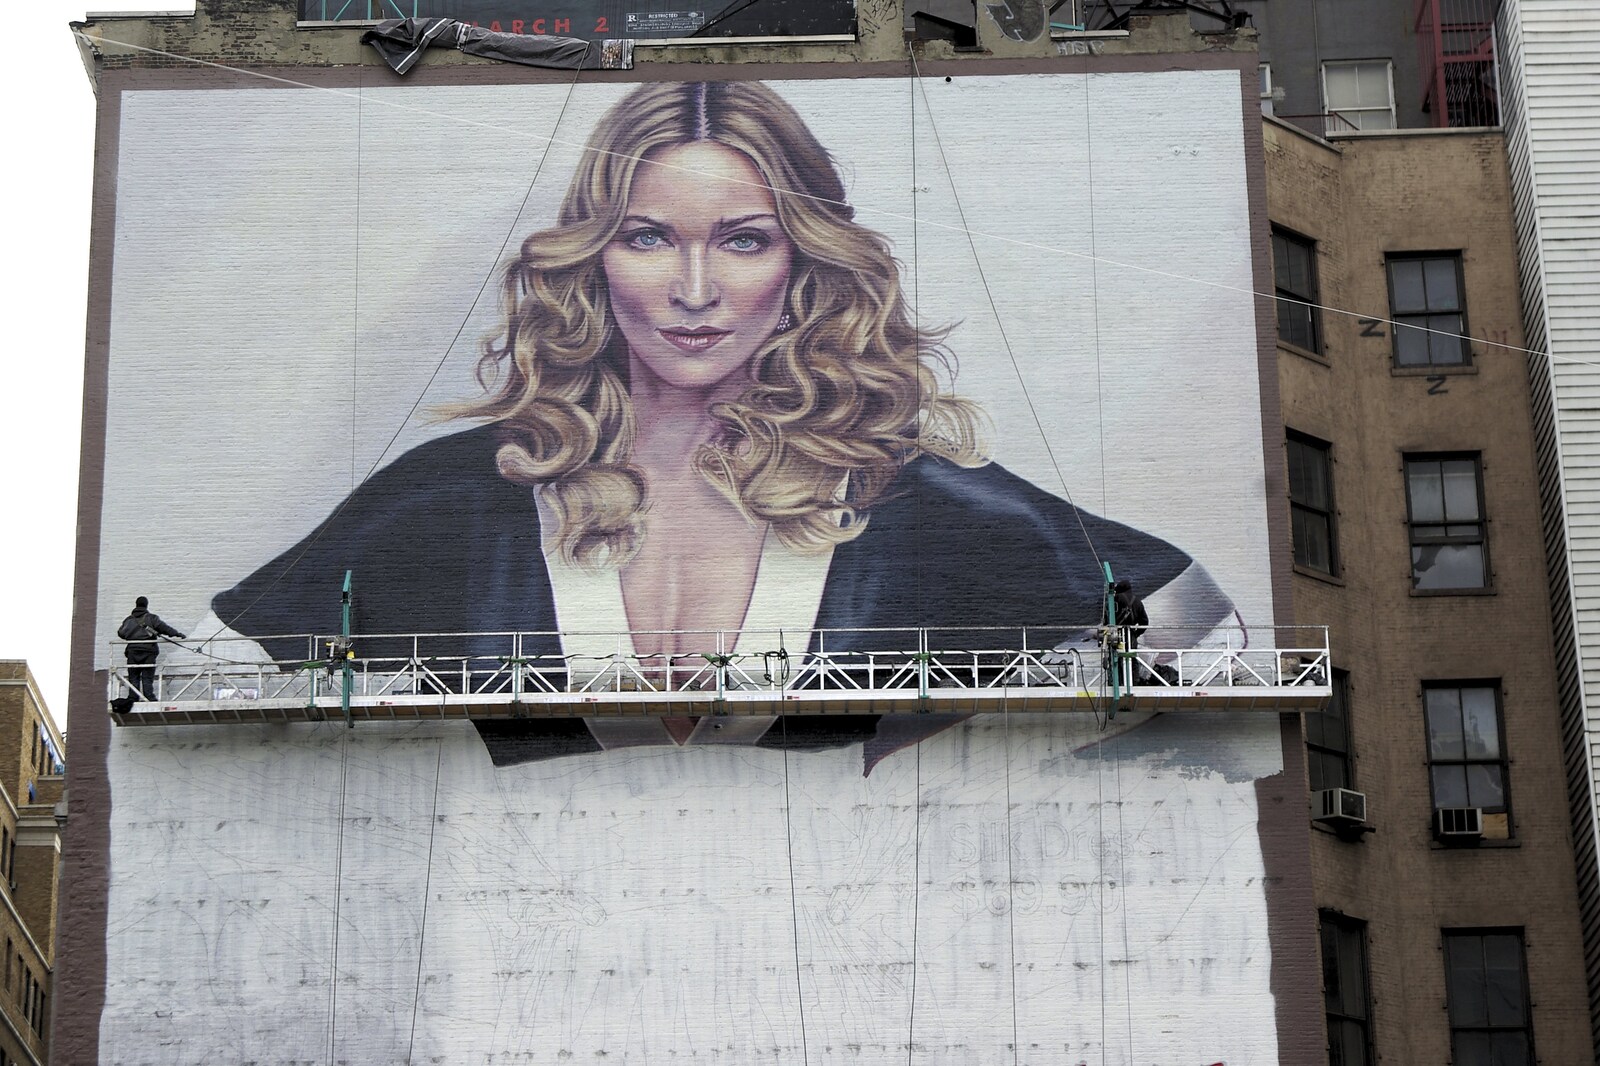 Crossing Brooklyn Bridge, New York, US - 26th March 2007: A massive painting is worked on